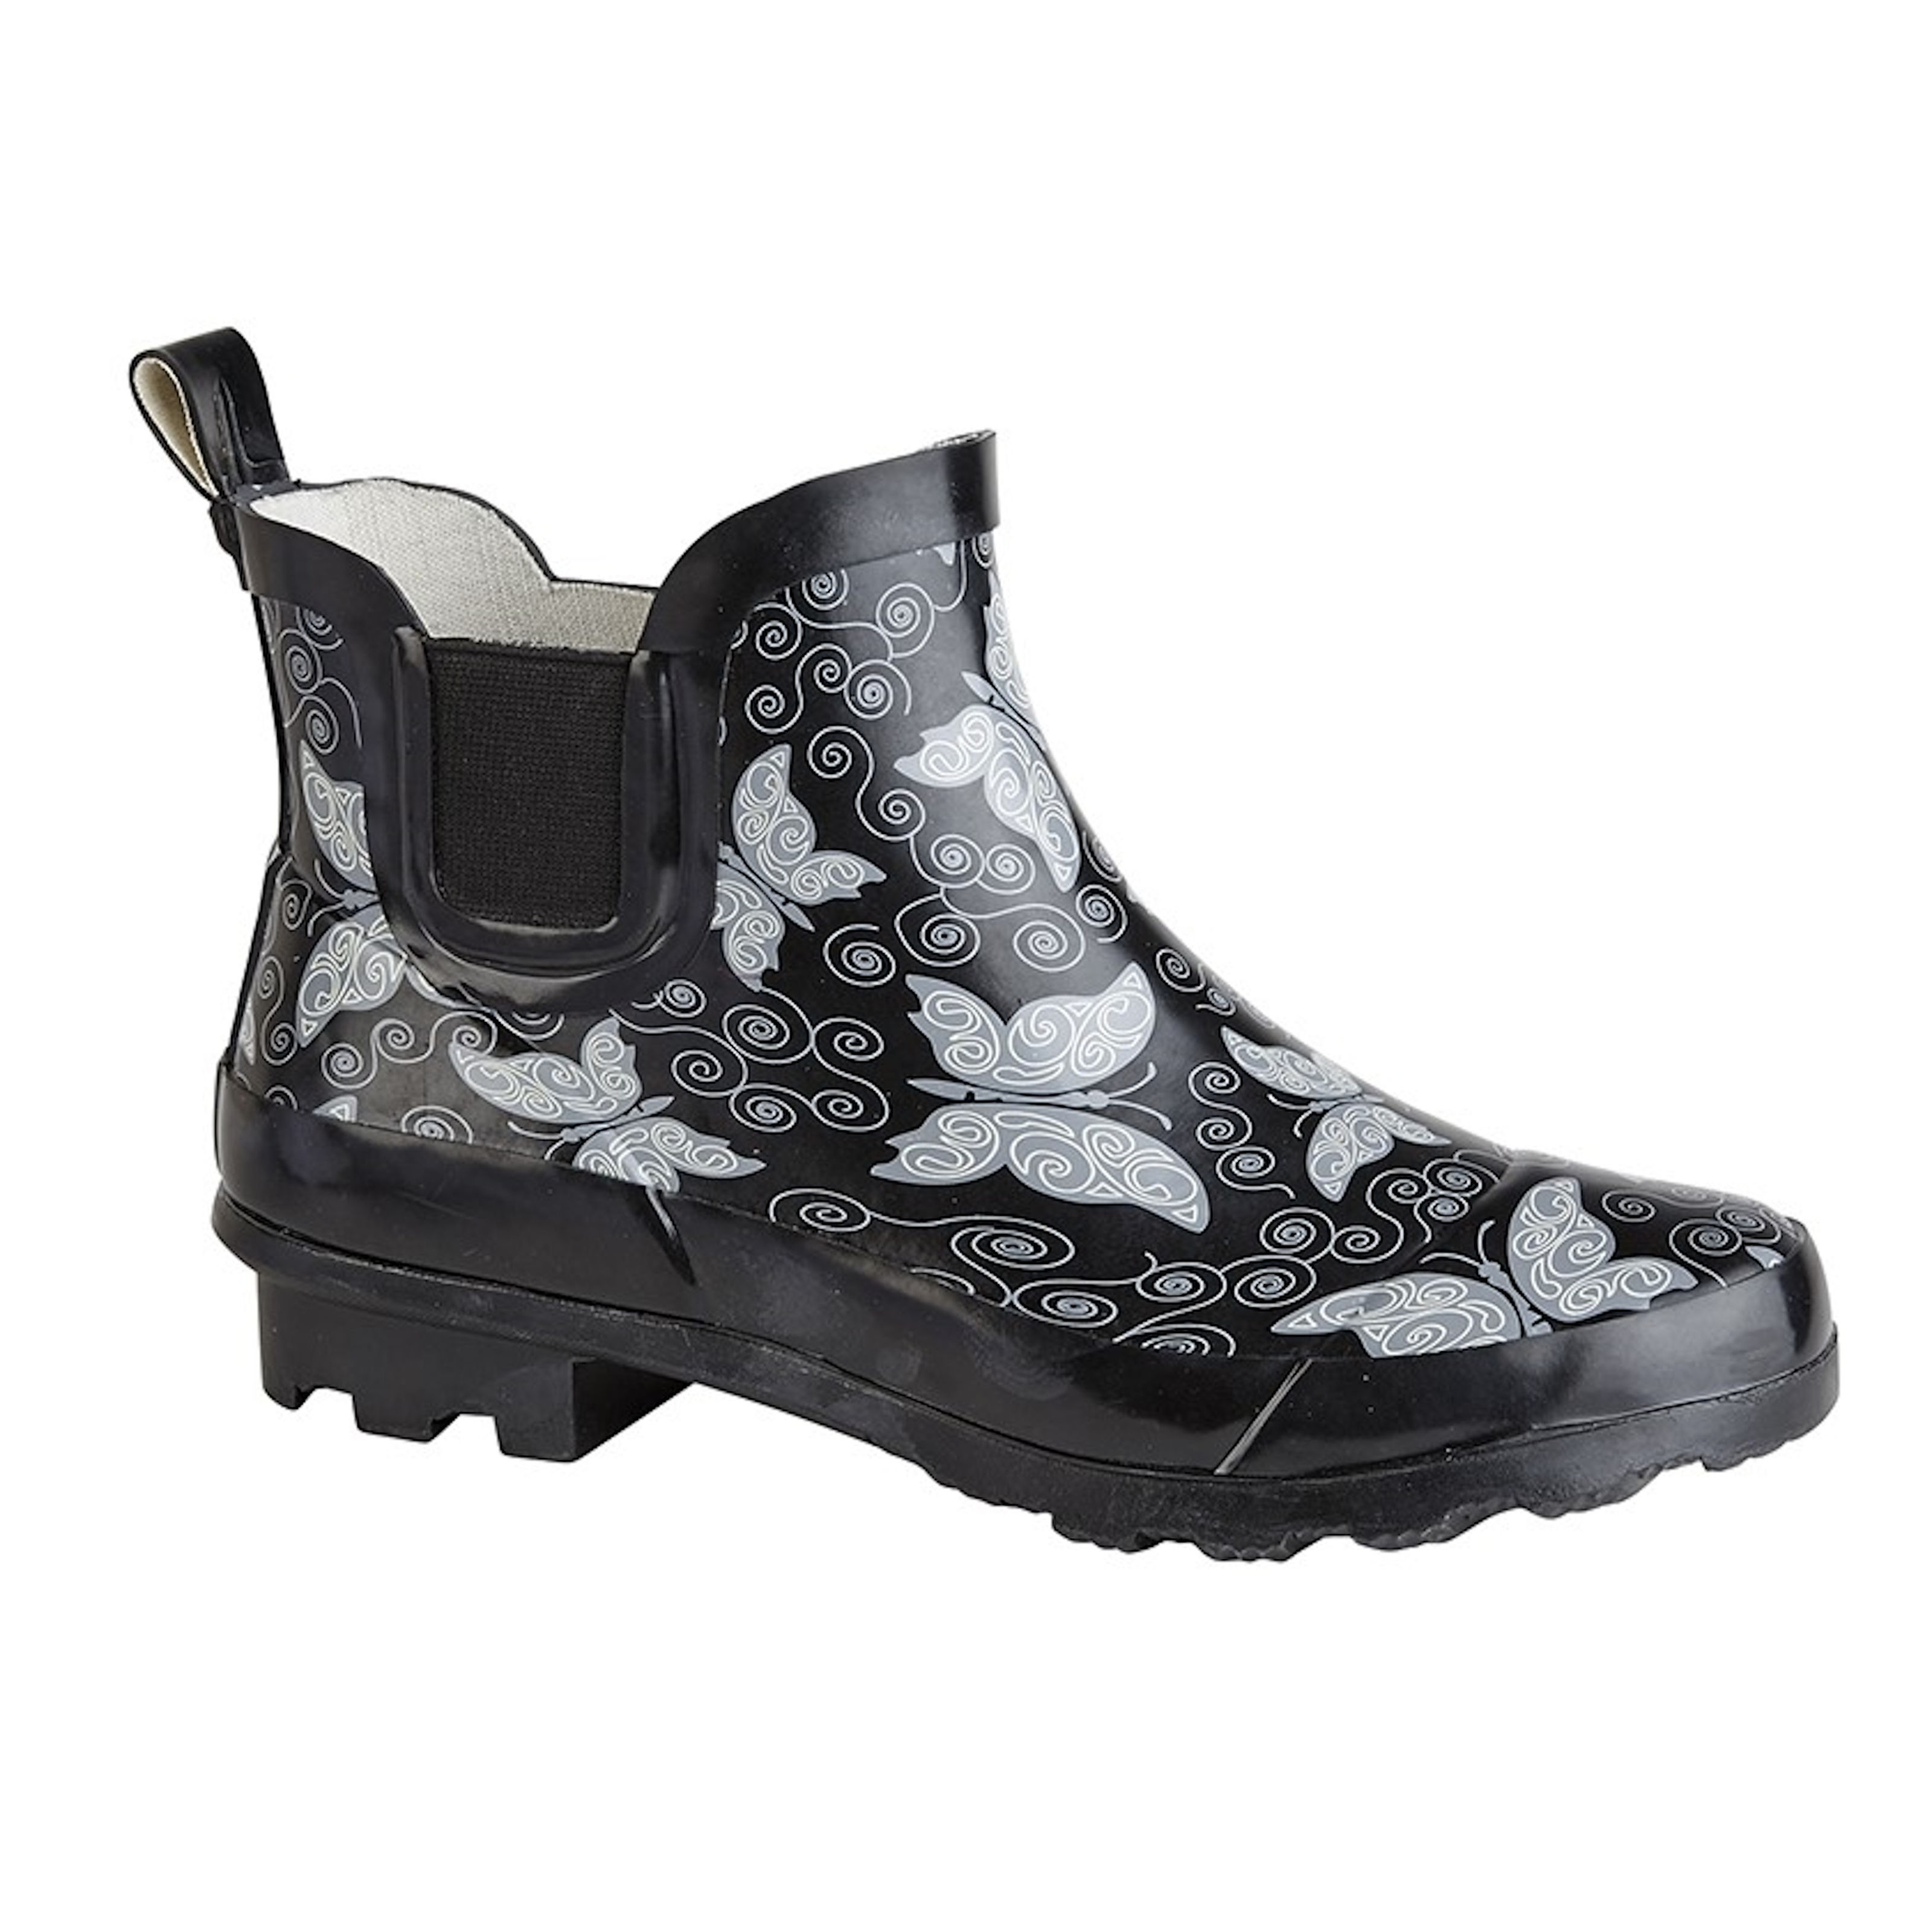 Womens Black Butterfly Print Wellington Wellies Short Ankle Boots UK Sizes 3-9